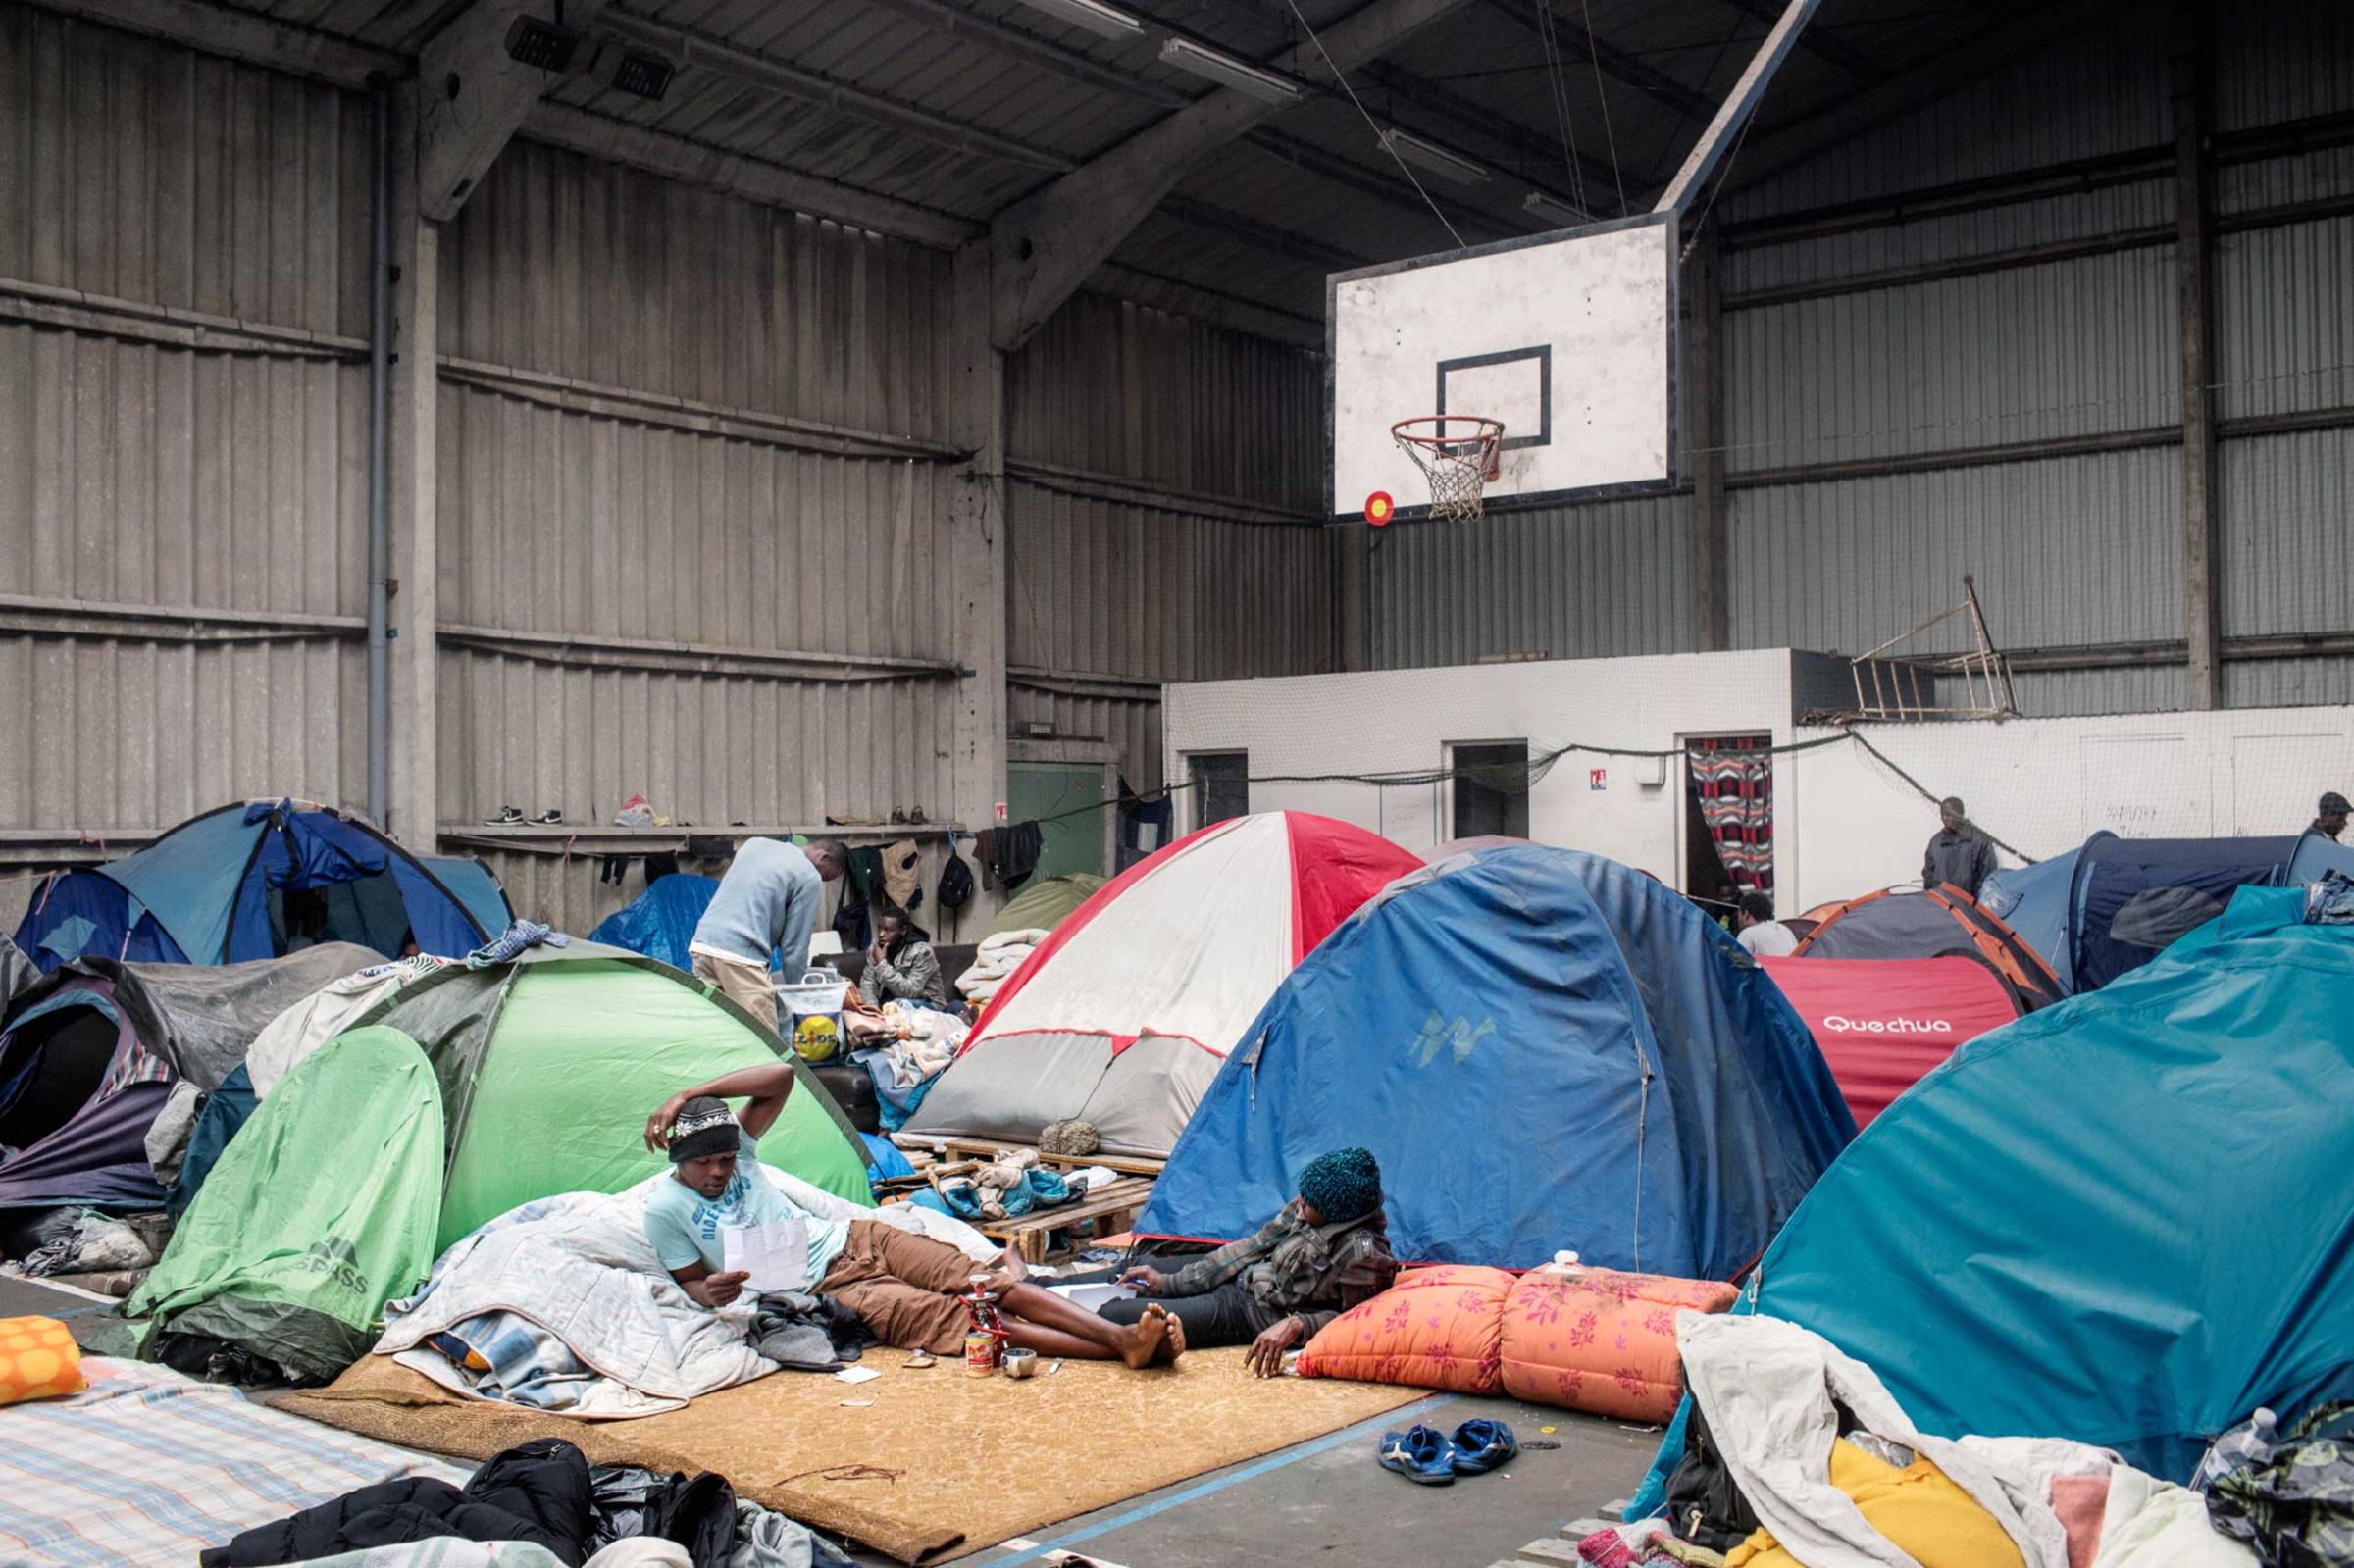 A settlement for refugees called the “Jungle,” in Calais, France, 2014. Migrants of different nationalities arrived in Calais, a port city in the northern France, in the hopes of traveling to the United Kingdom. Calais, France, 2014.